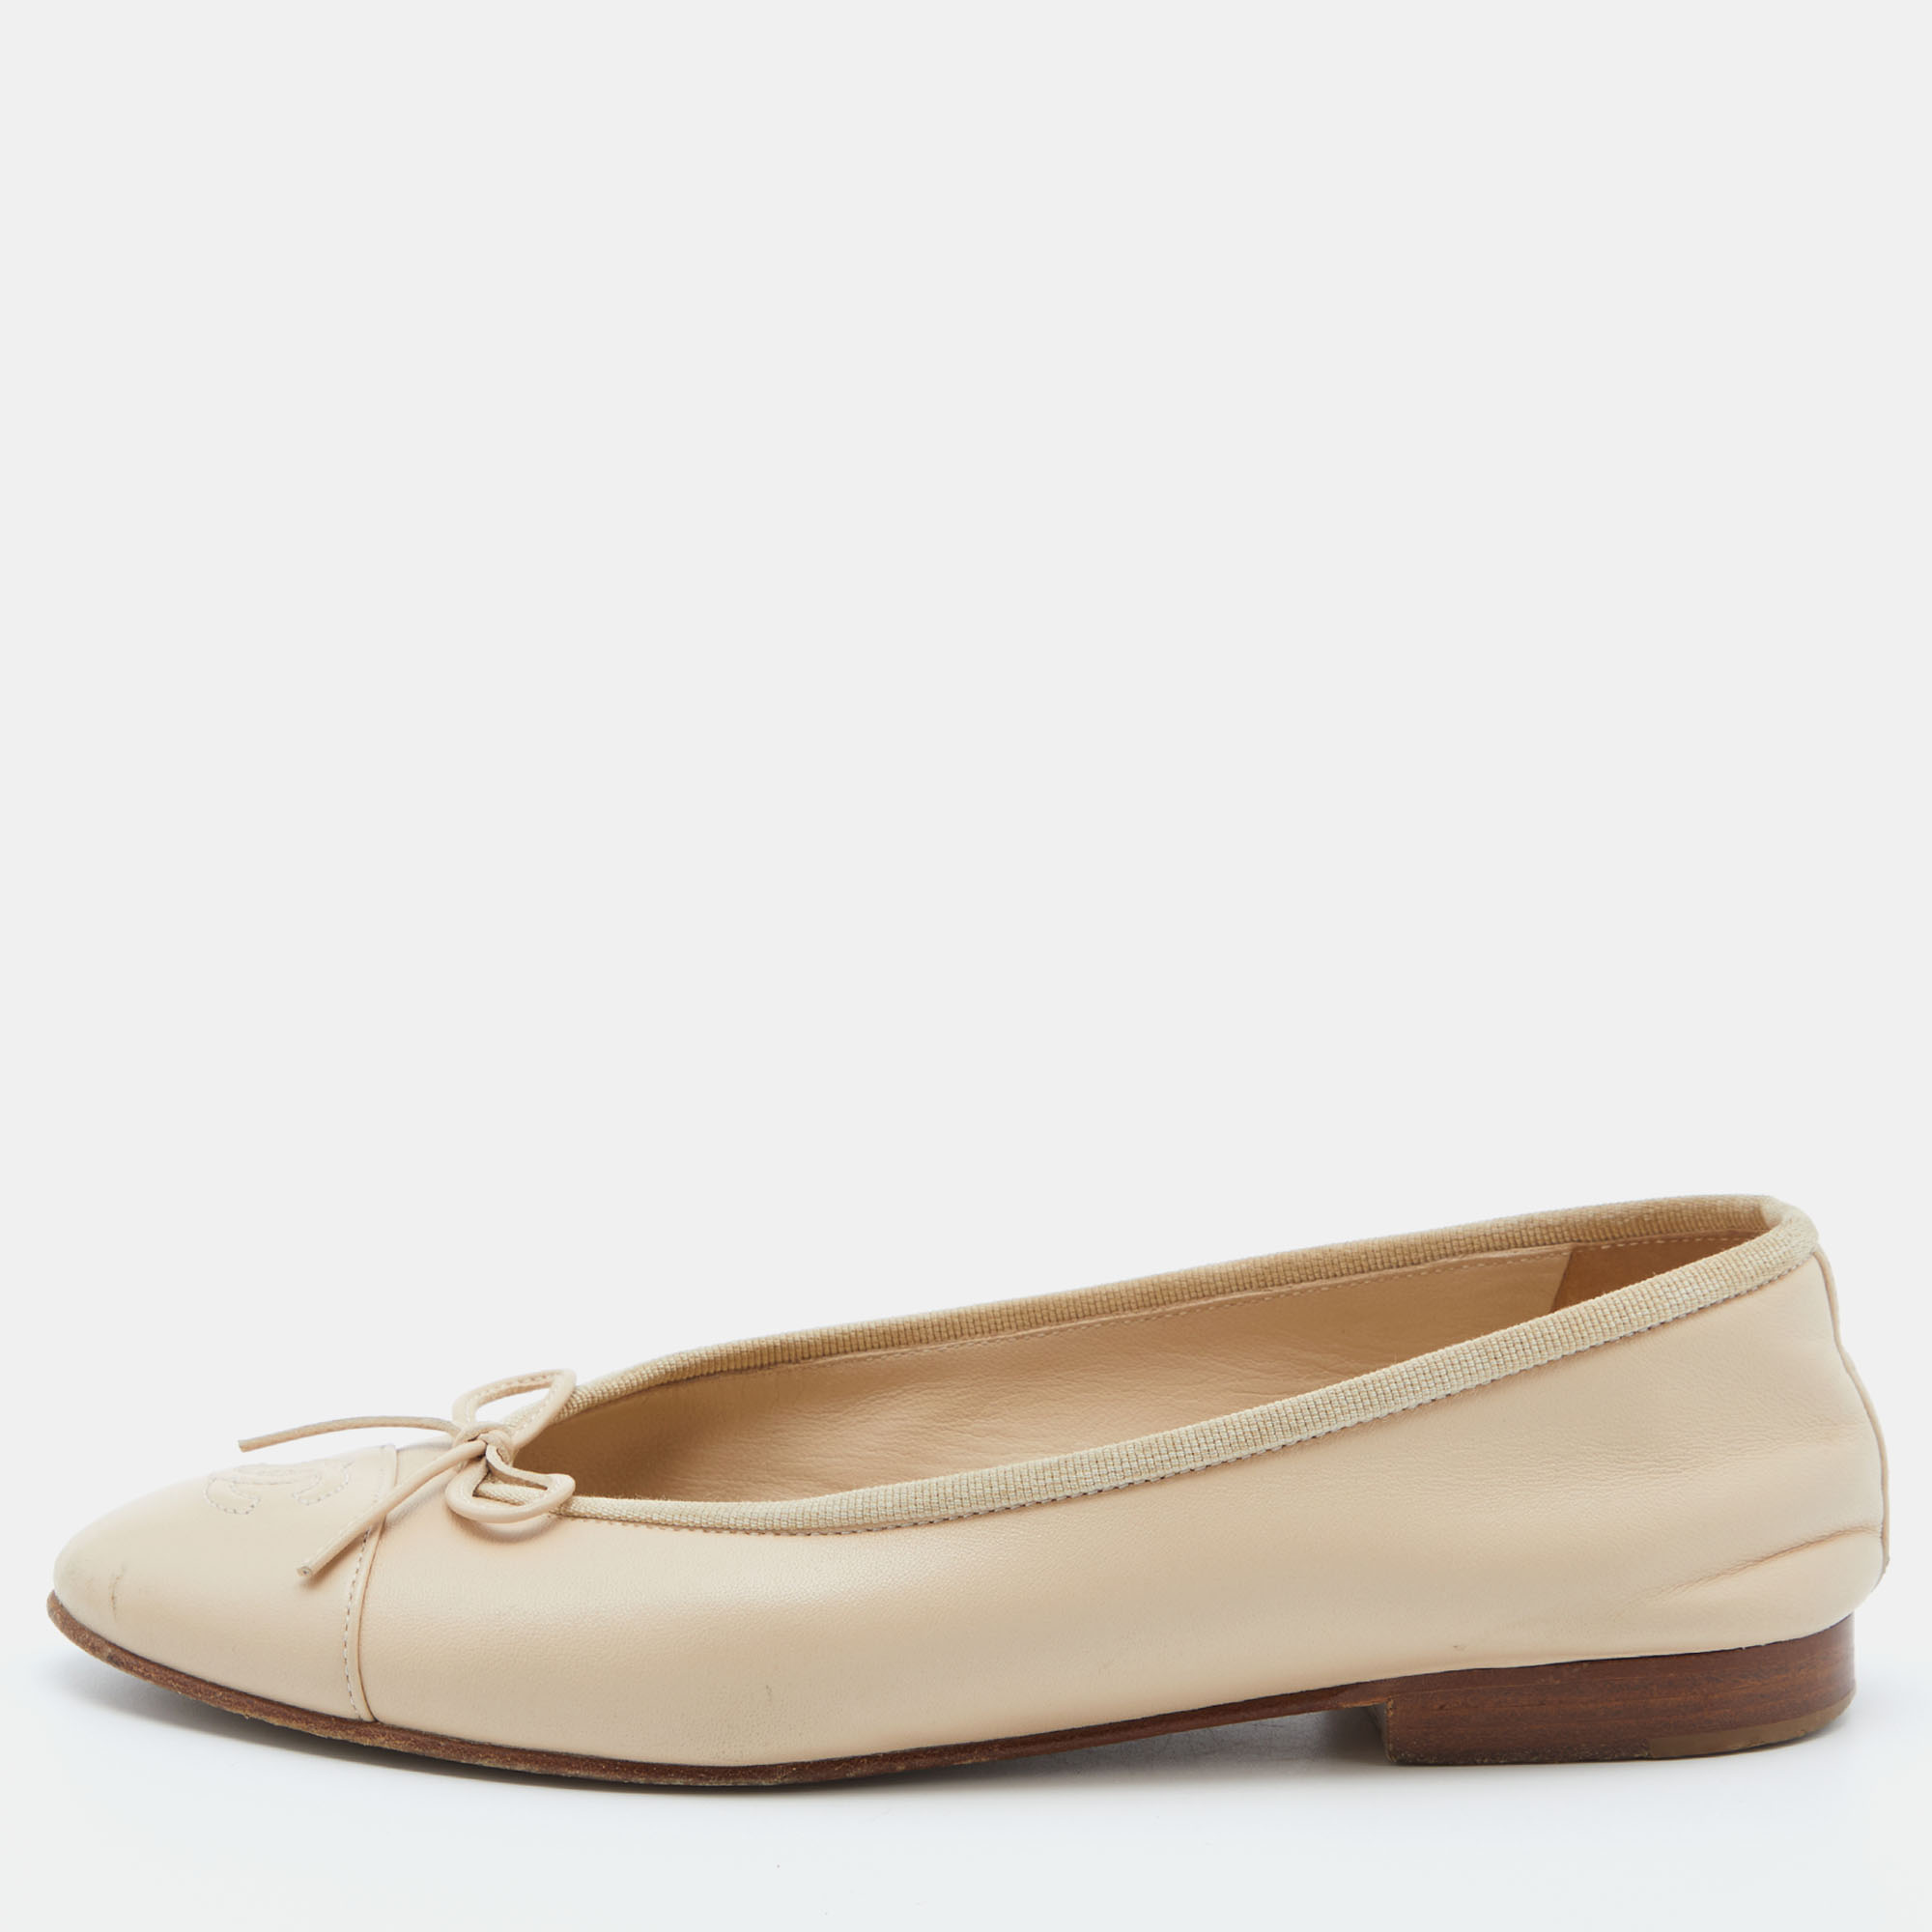 Pre-owned Chanel Beige Leather Cc Bow Ballet Flats Size 37.5